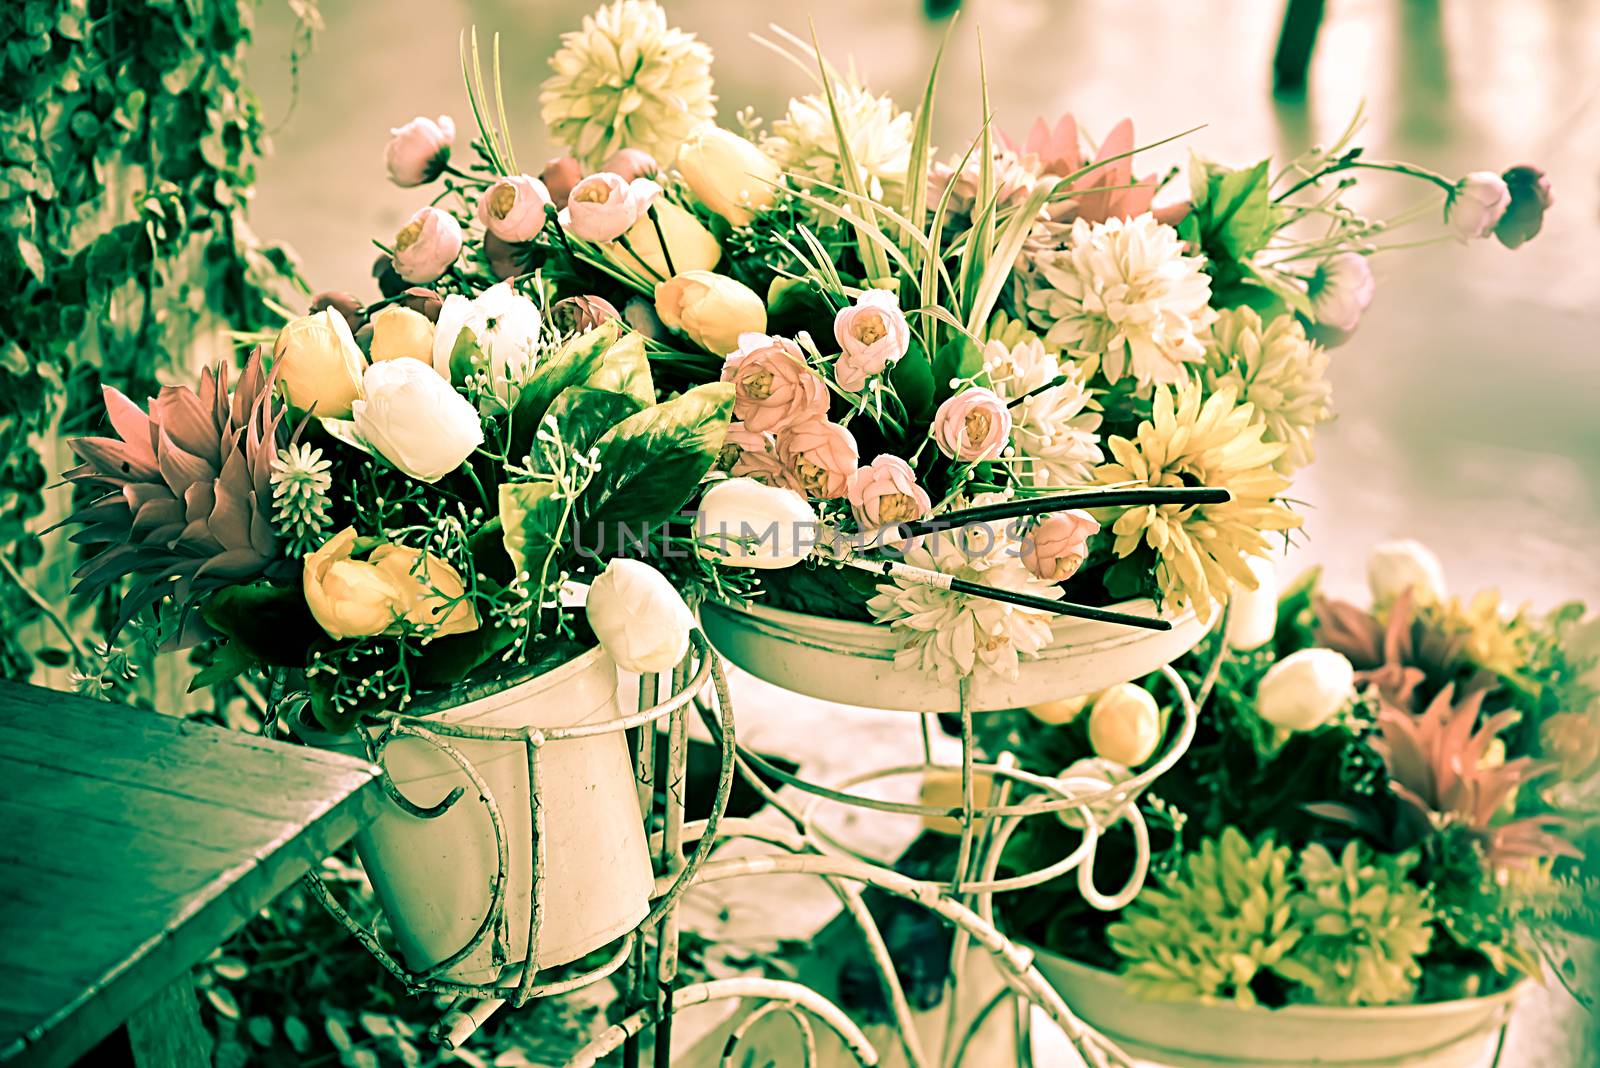 Decoration artificial flower in basket on bicycle